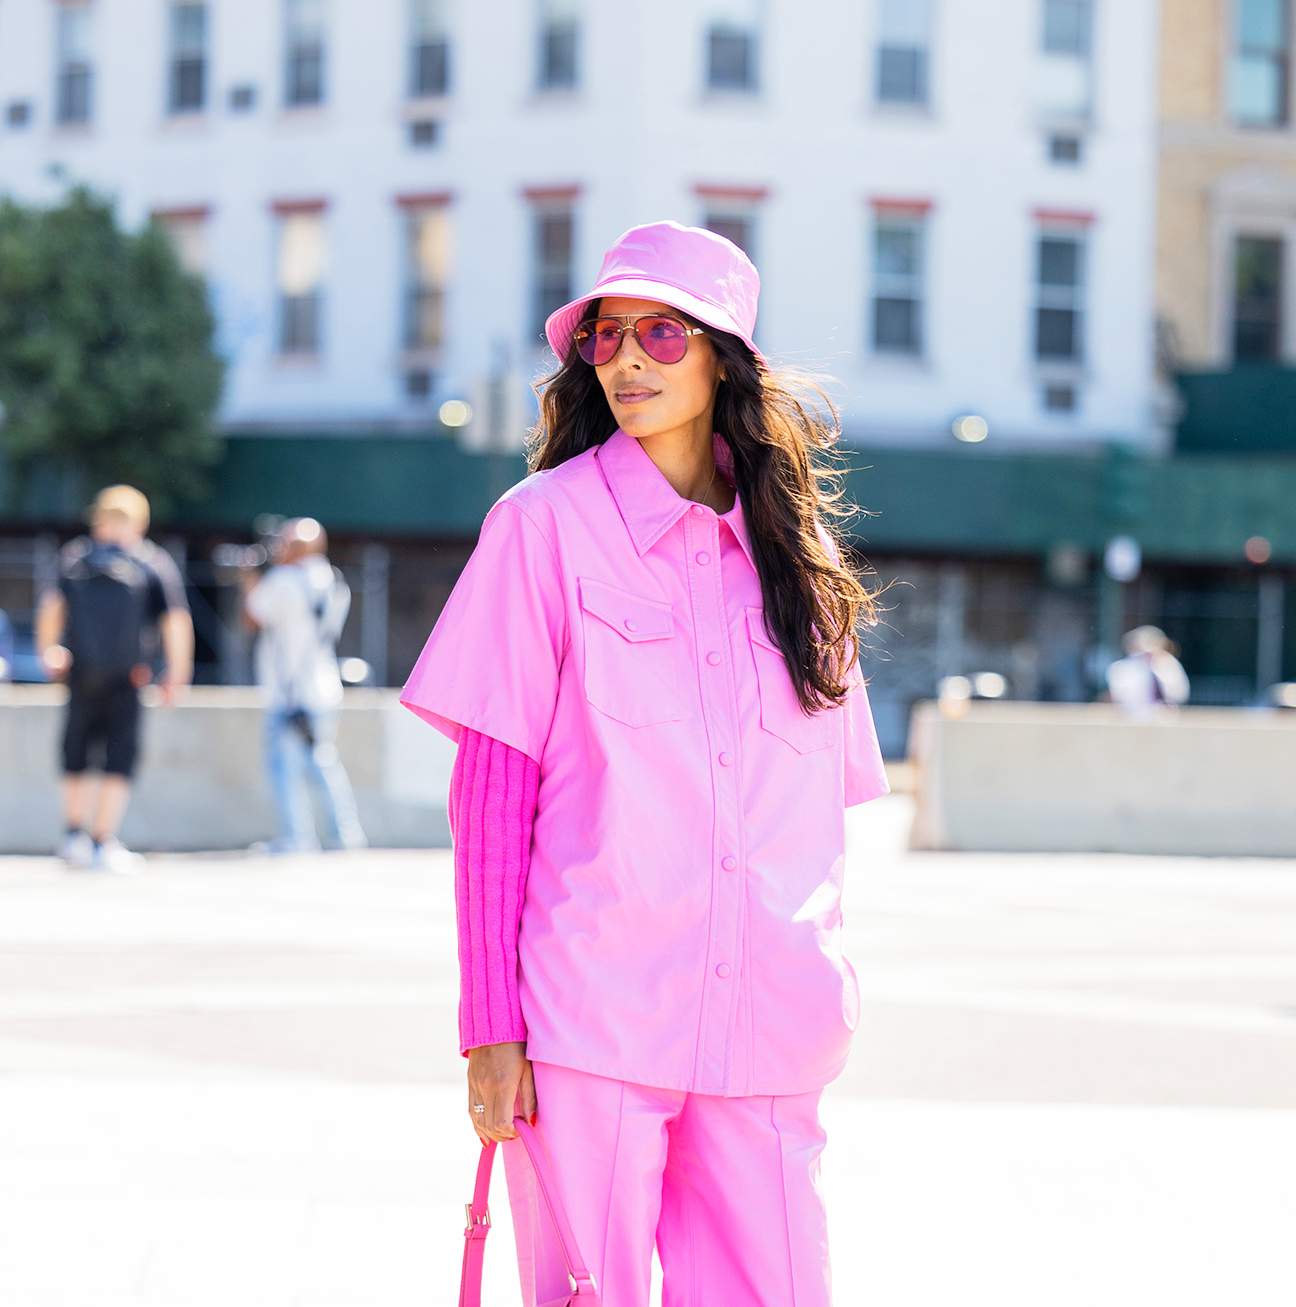 Shop All the Coolest Street Style Looks From New York Fashion Week